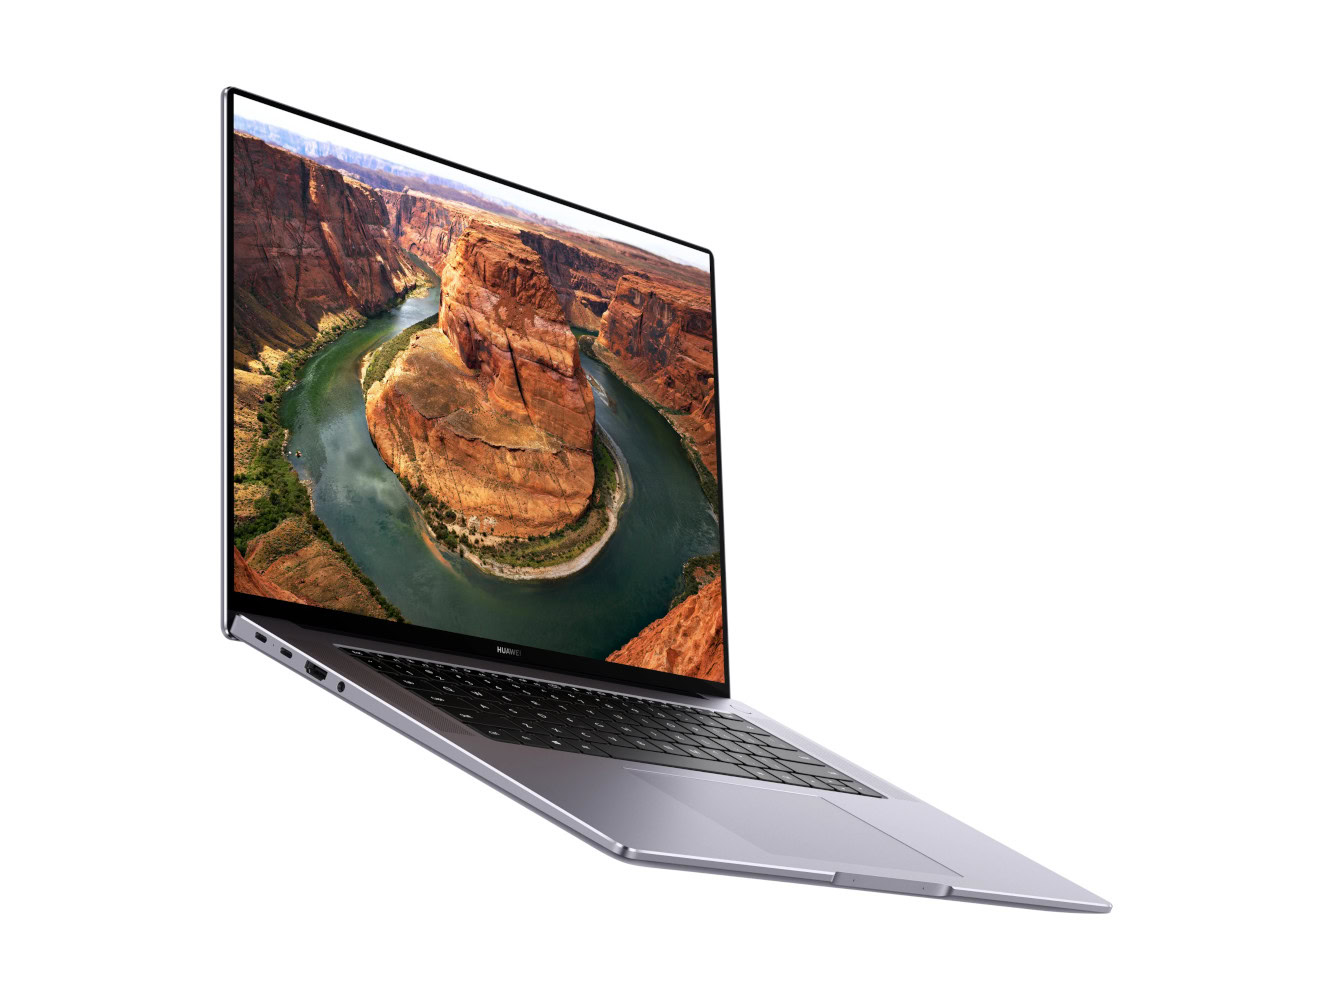 HUAWEI MateBook D 16 - Big screen power laptop with improved data signal!  #Taglish 